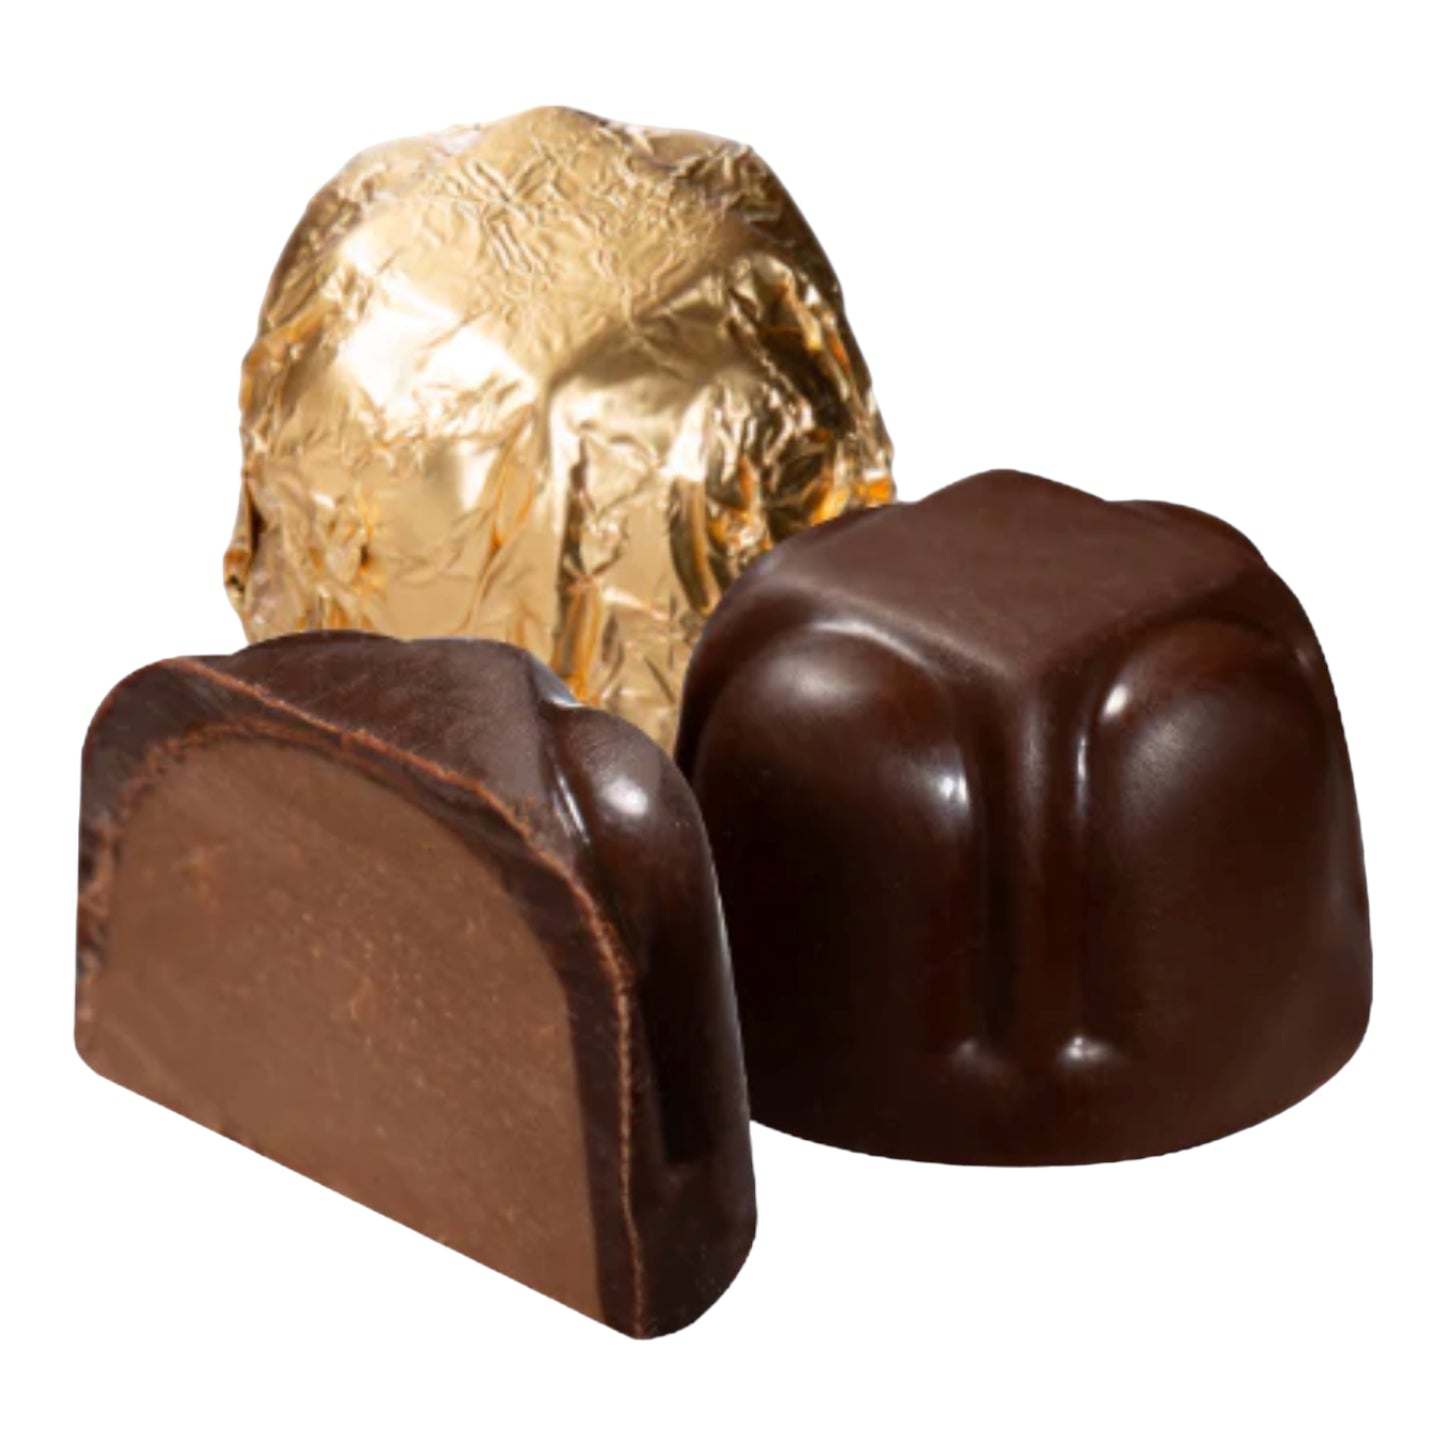 Chocolate Praline Truffles, Gold or Silver Wrapped